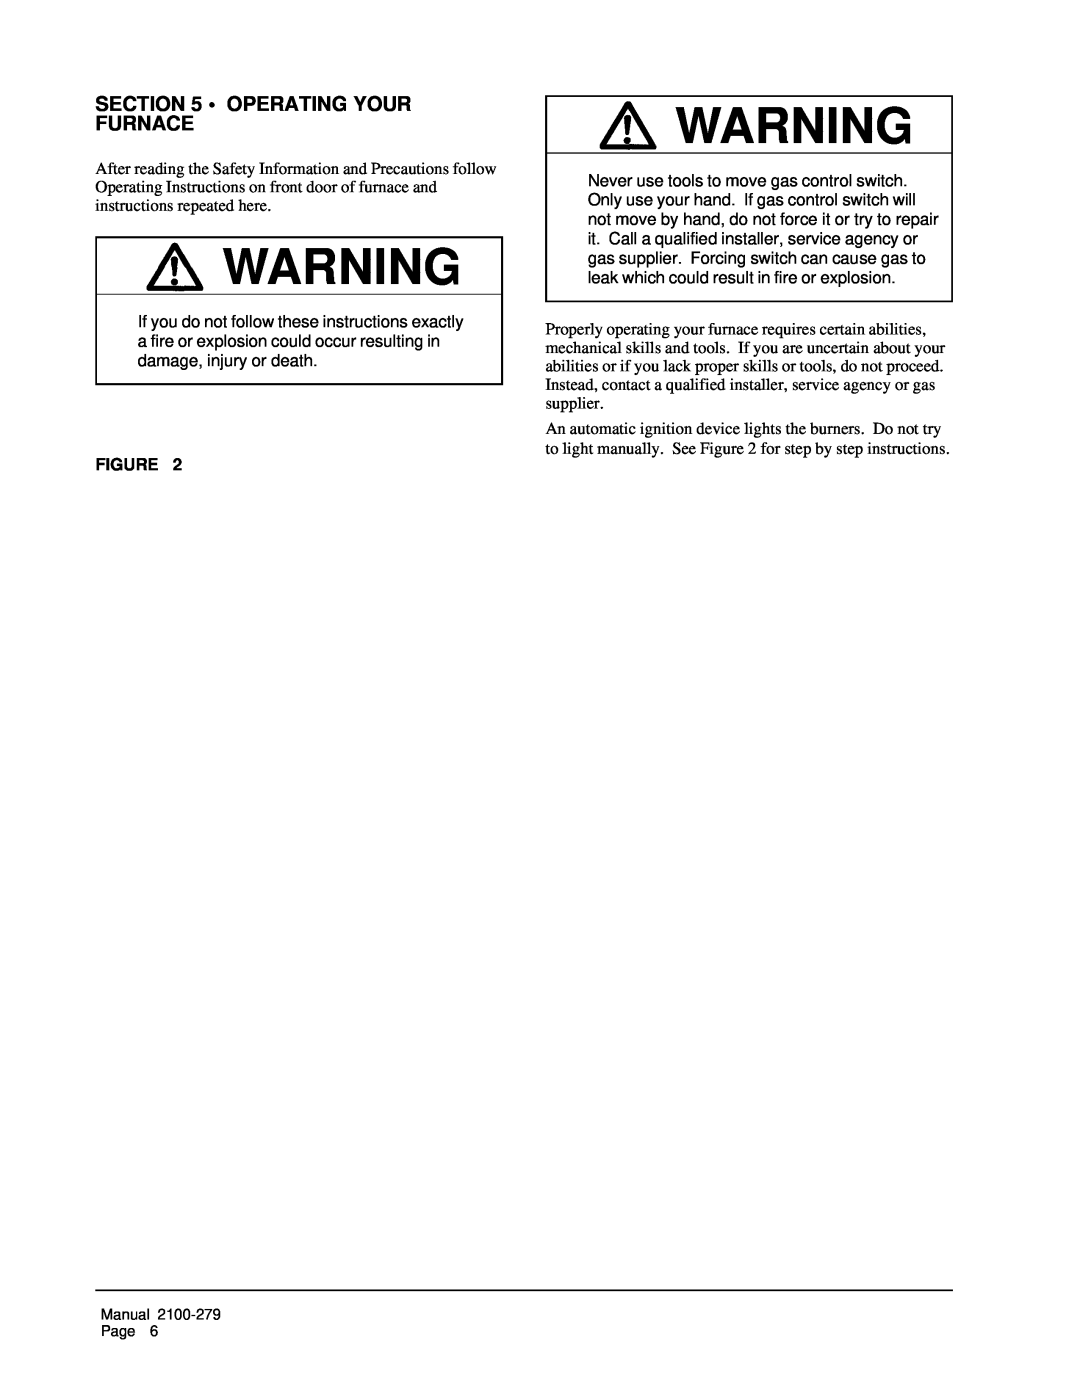 3Com 43506 operating instructions Operating Your Furnace 